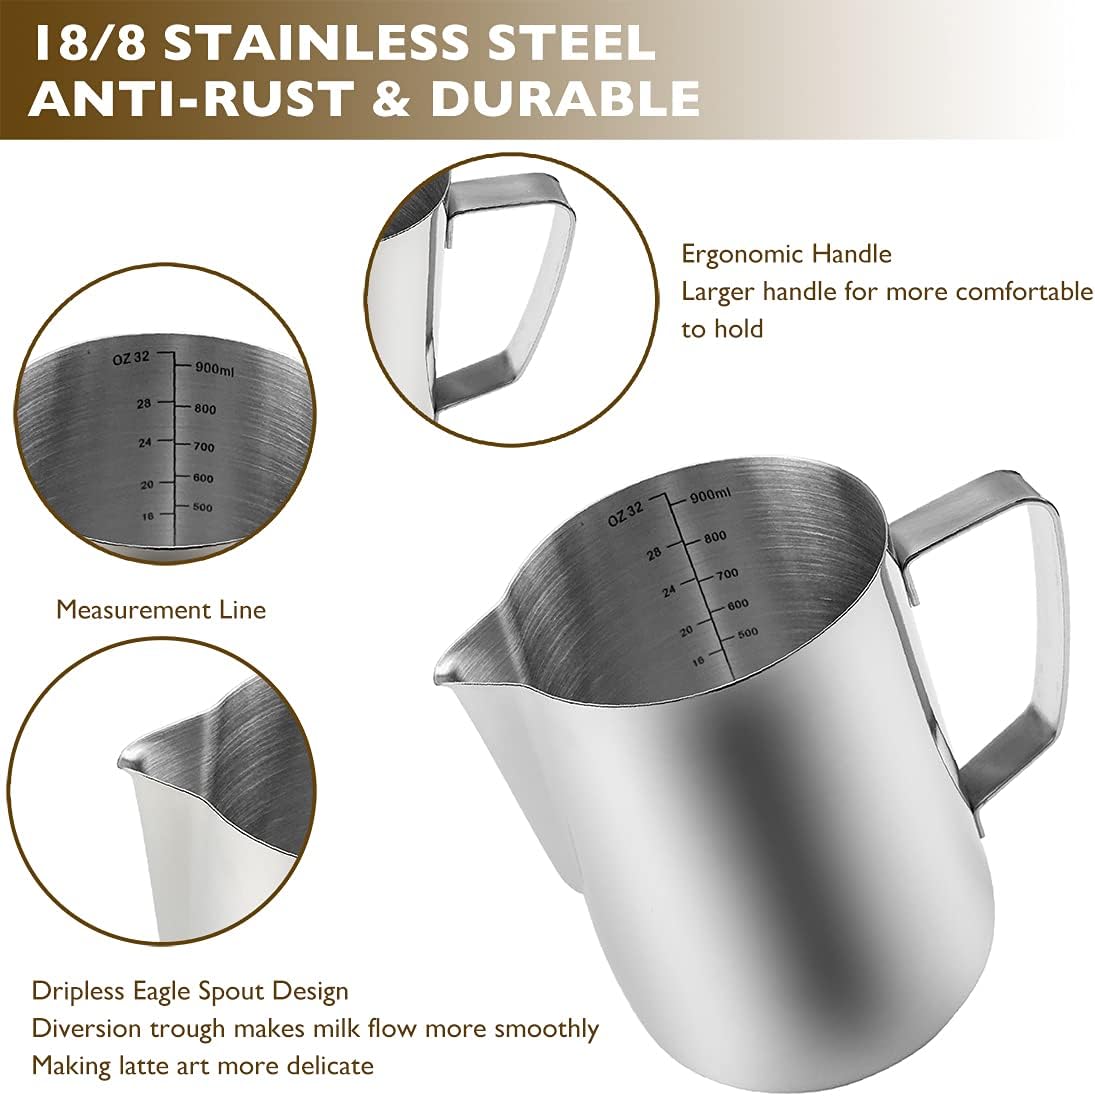 CAMKYDE Stainless Steel Milk Frothing Pitcher 12 oz, Espresso Steaming Pitcher with Decorating Pen for Espresso Machines, Cappuccino, Latte Art